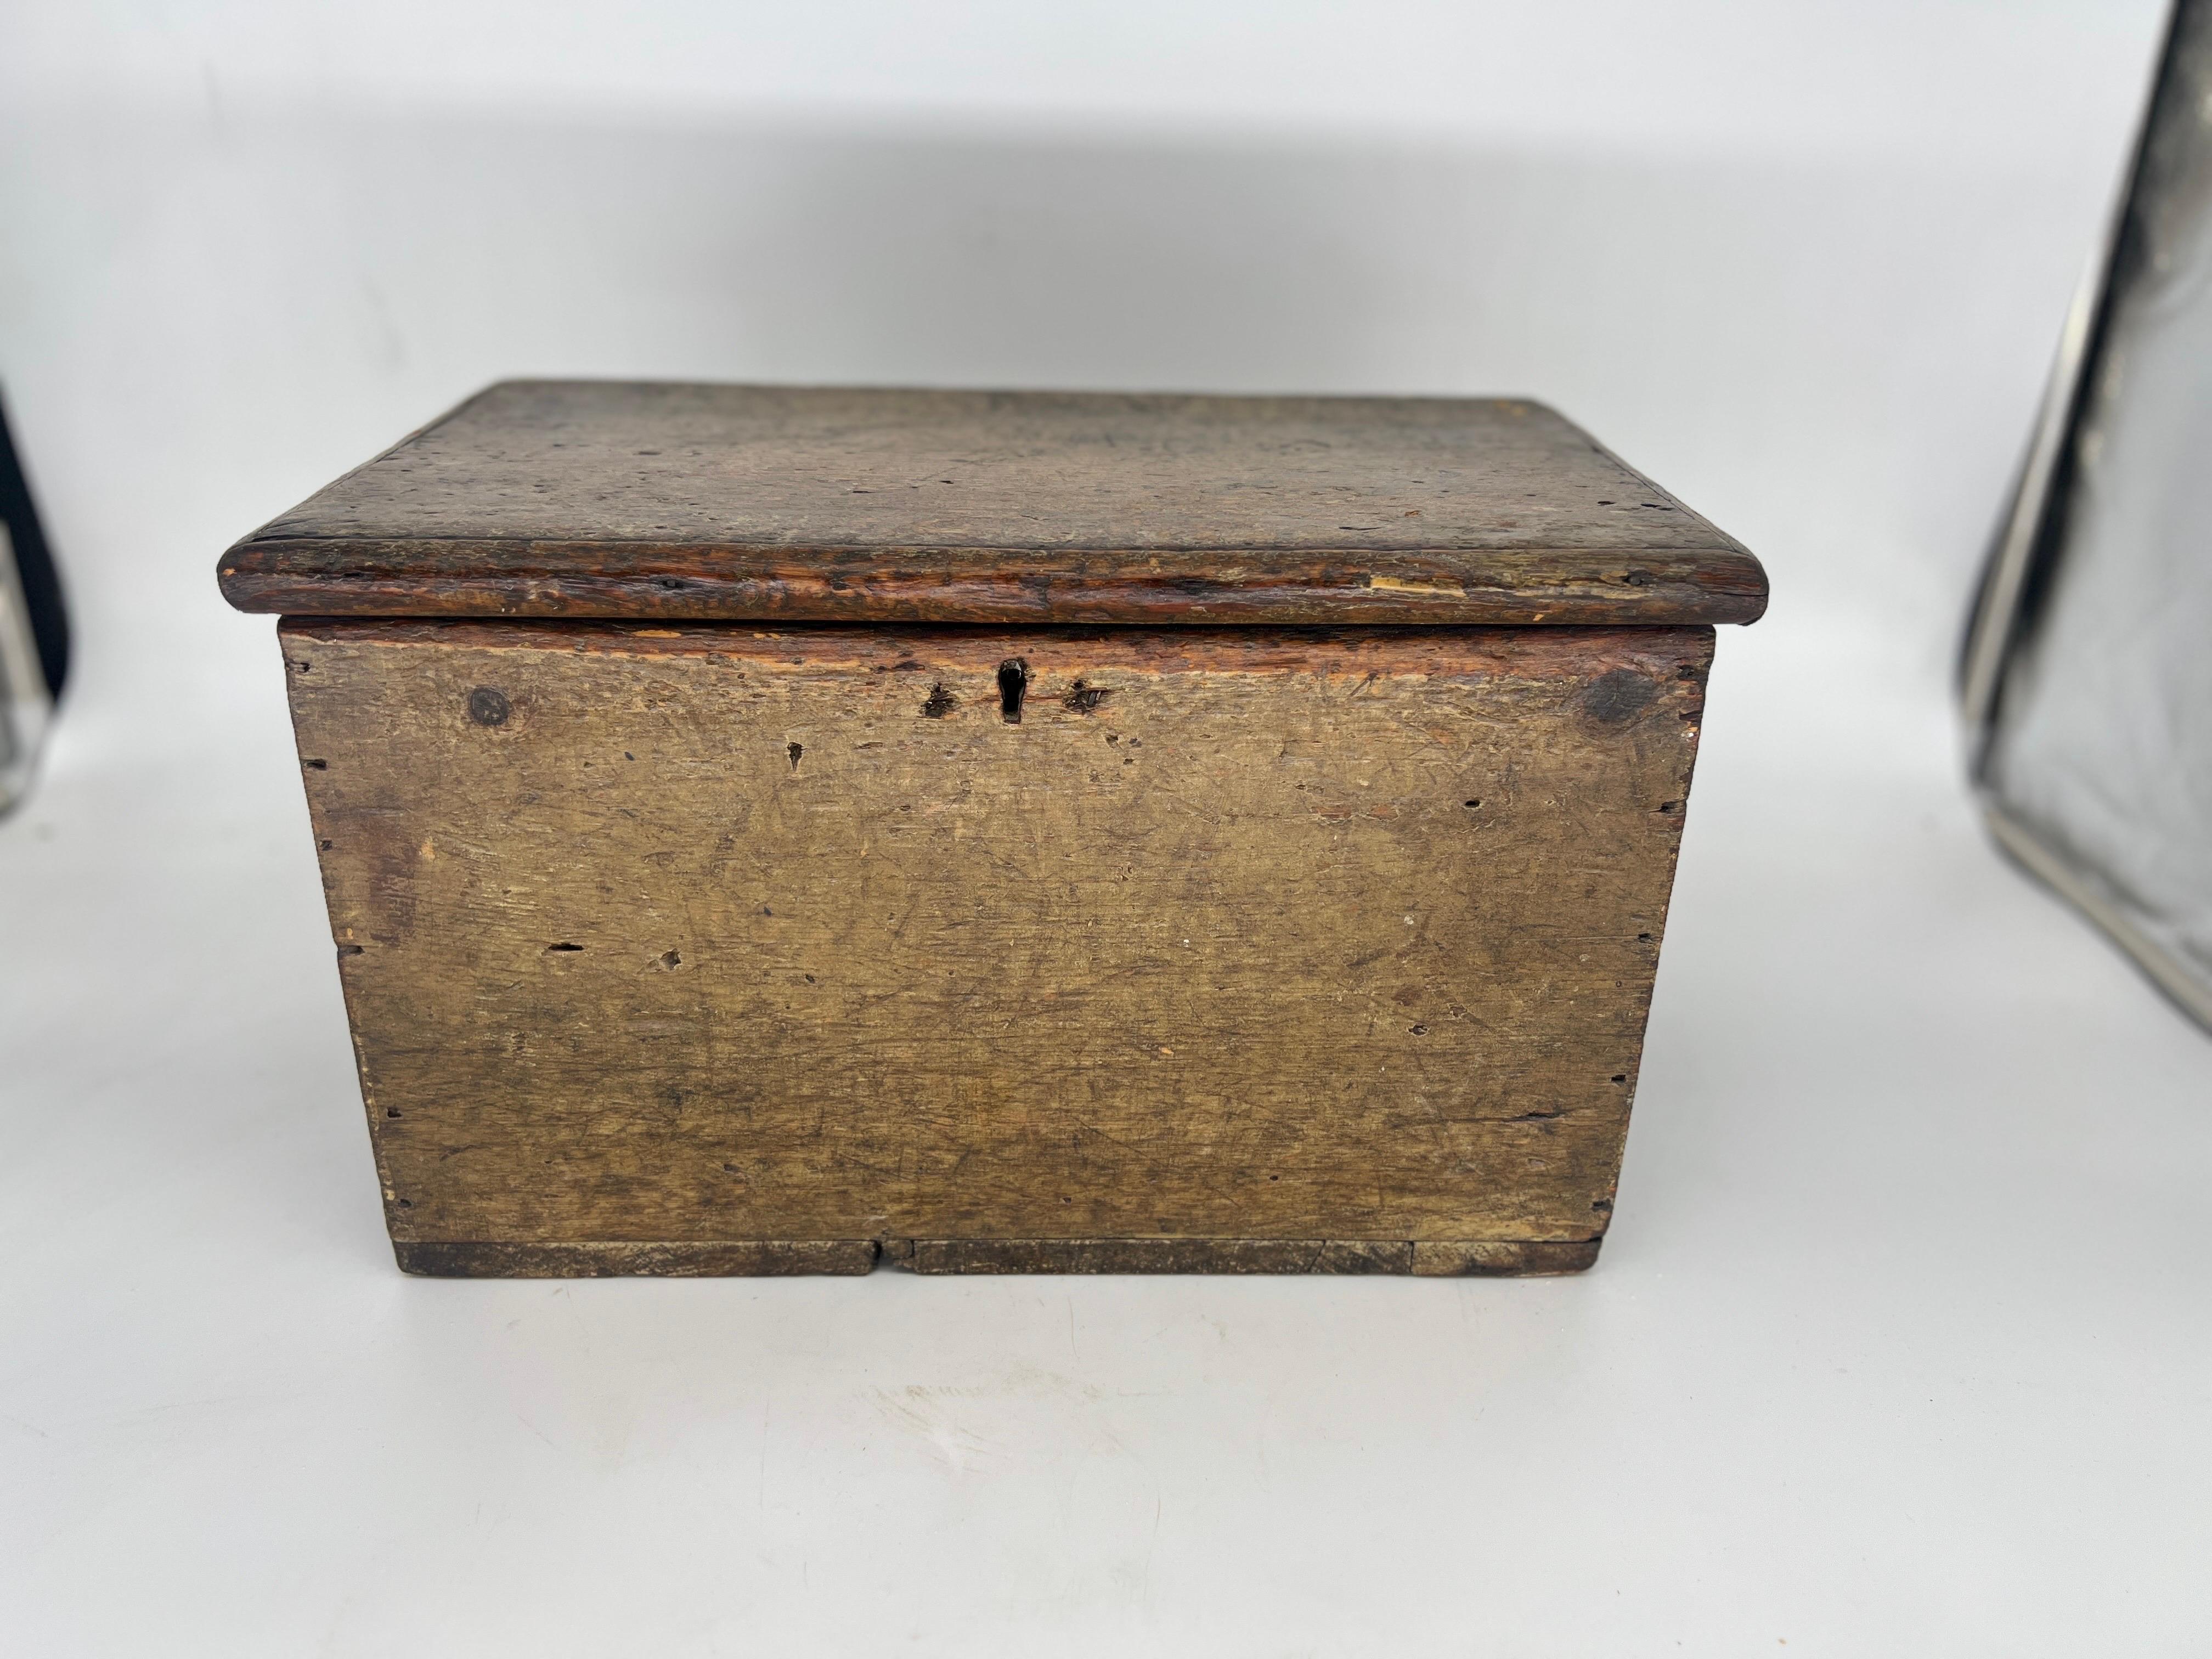 This antique American storage box exudes a charming rustic appeal with its hand-painted design on a sturdy wooden surface. The box dates back to the 1800s and features ample space to store tools or documents, making it perfect for collectors or